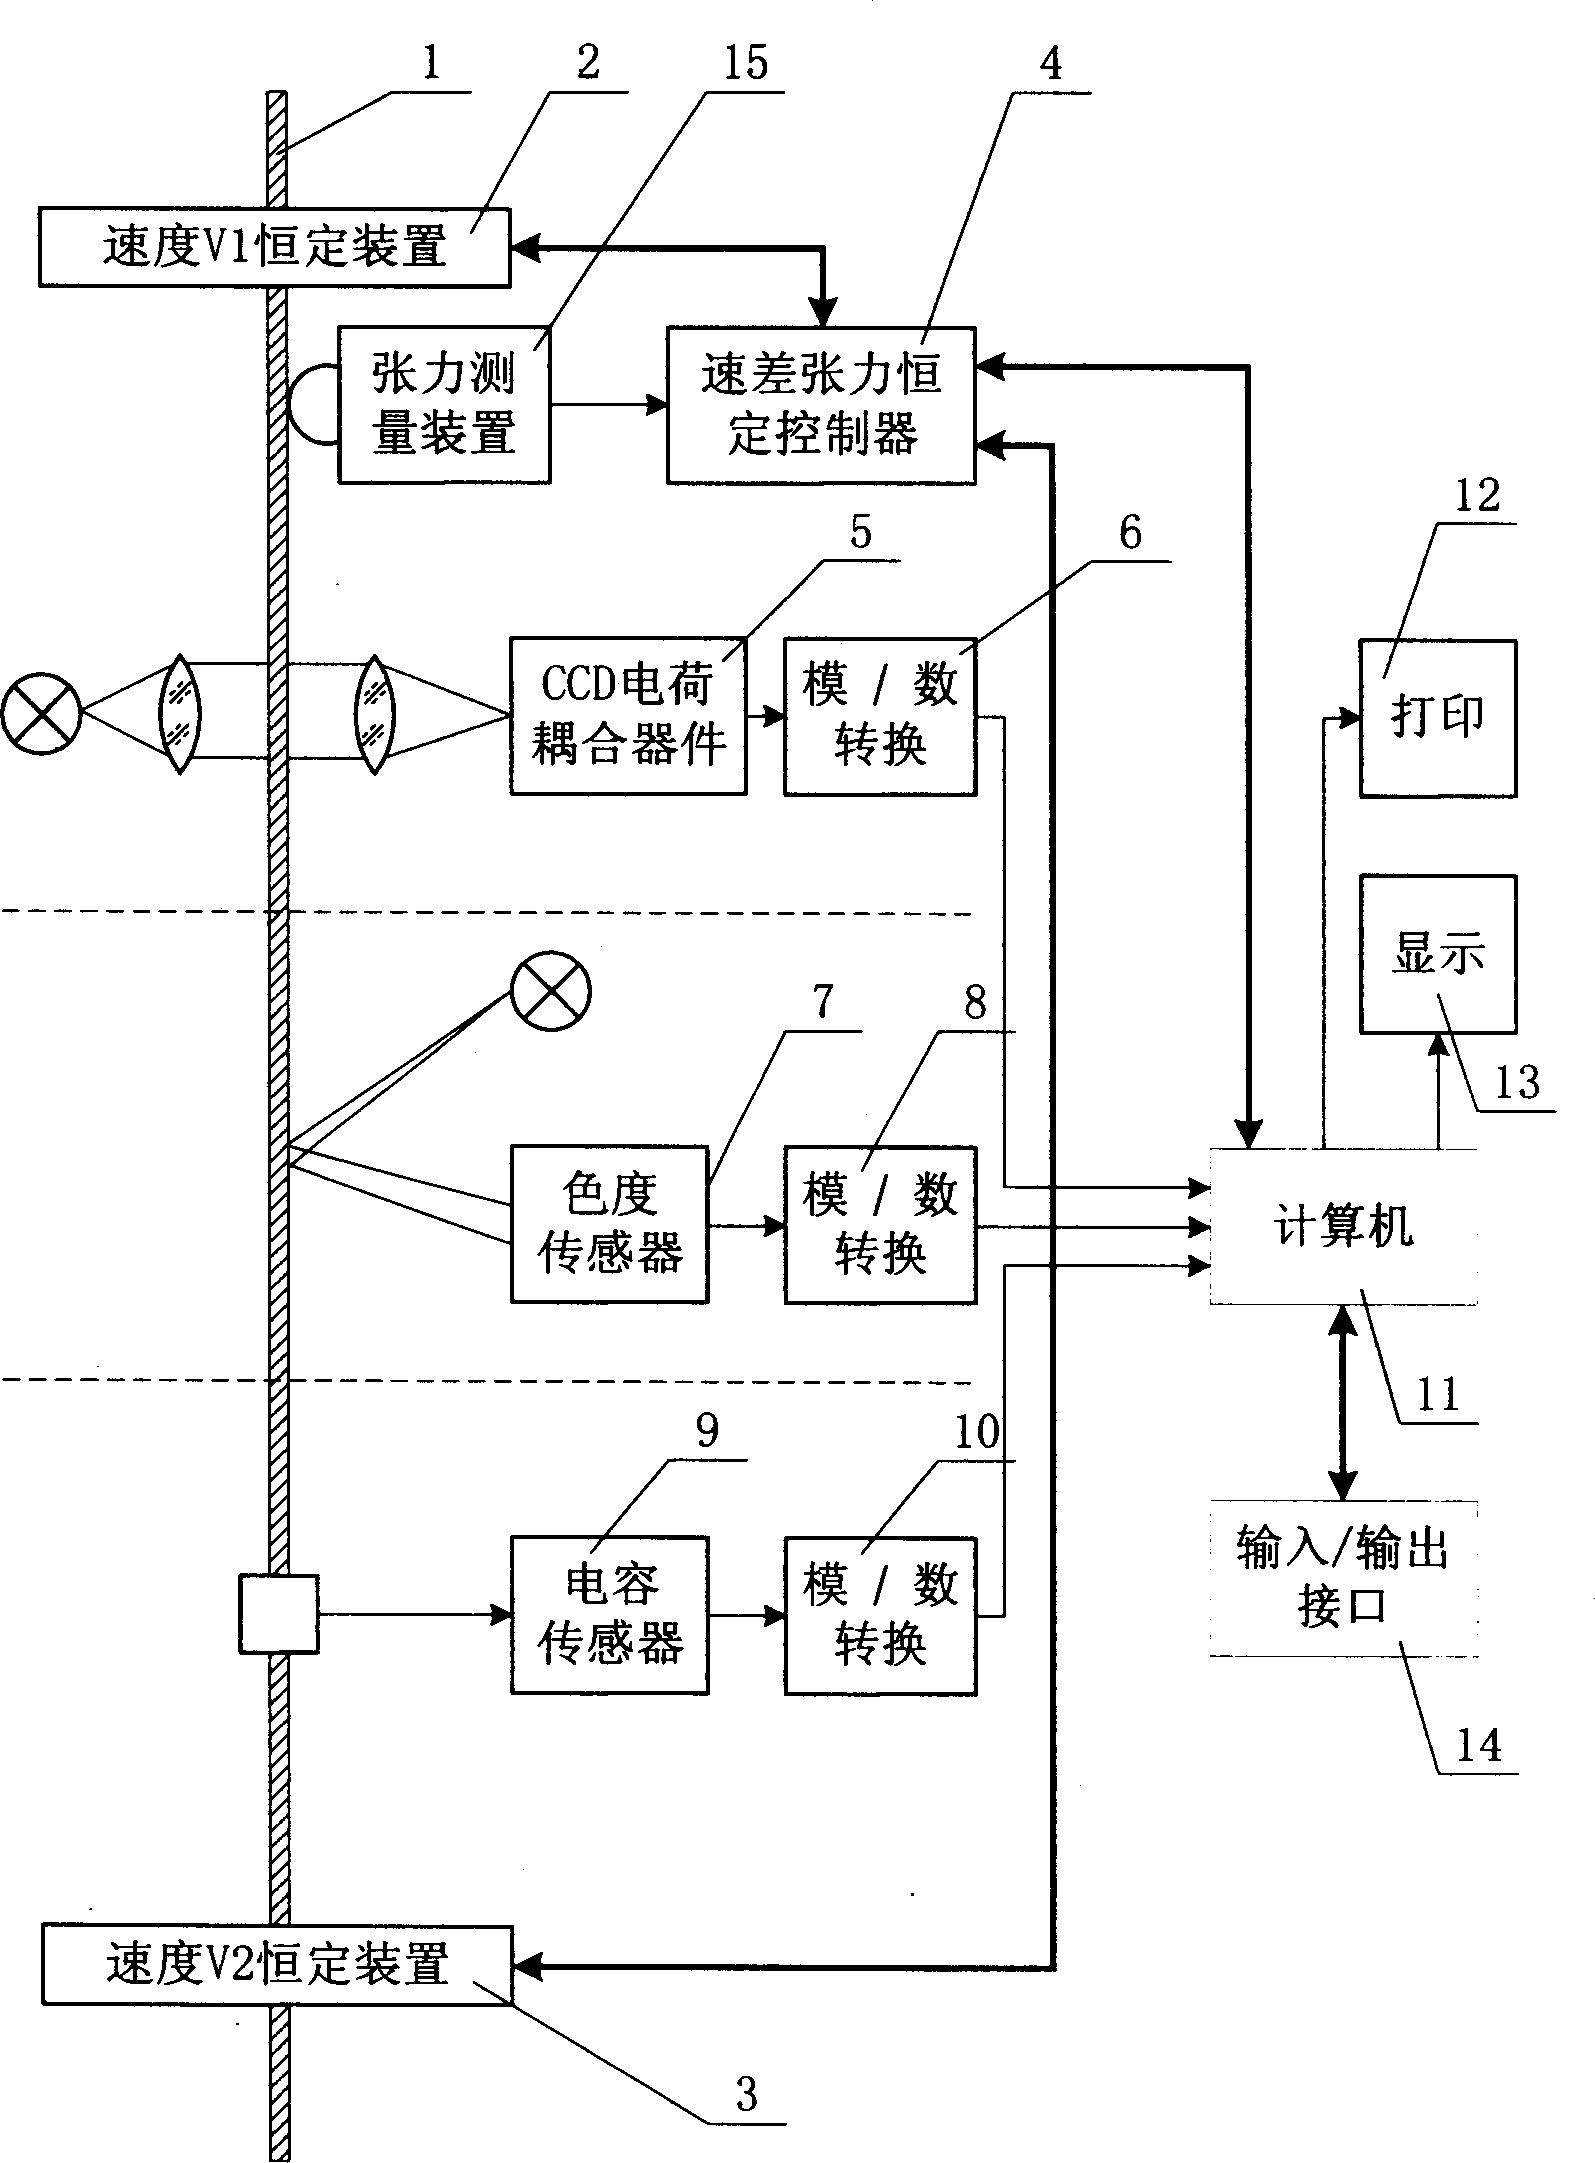 Yarn quality and component detecting method and device